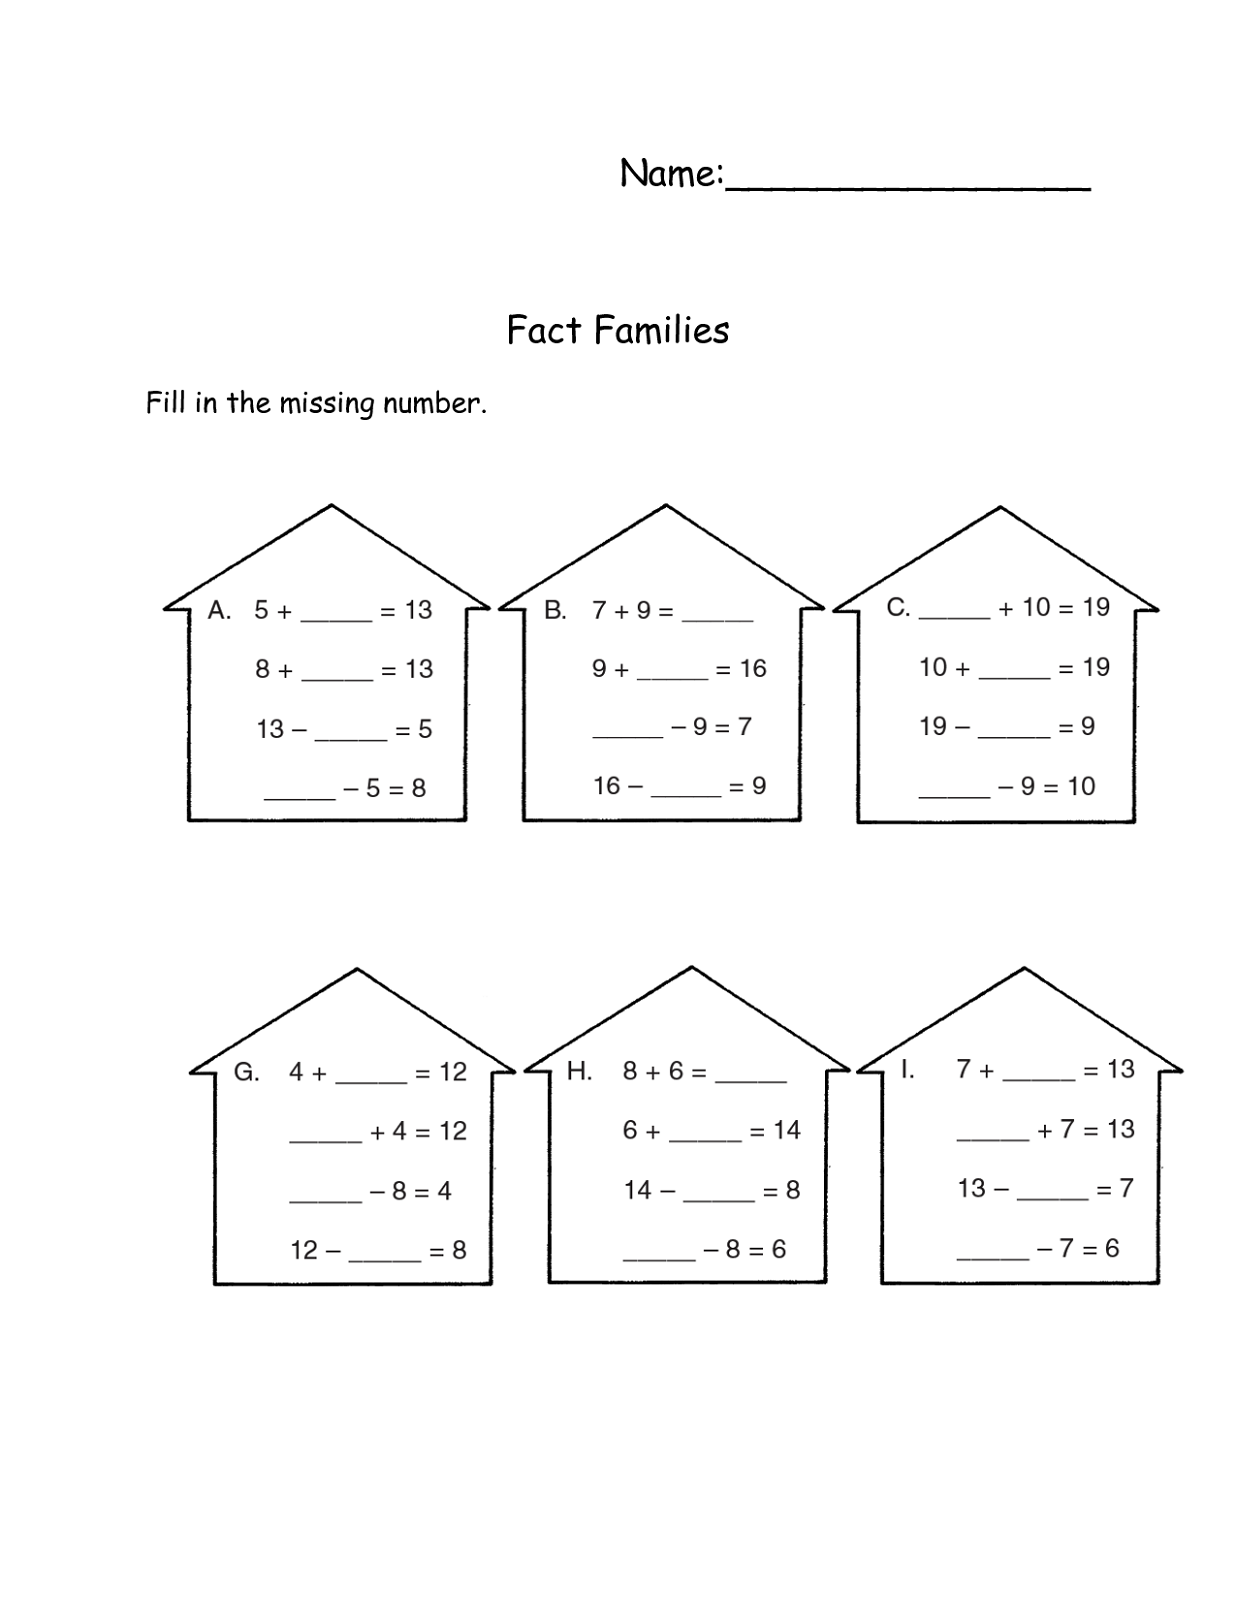 Fact Family Worksheets to Print | Activity Shelter